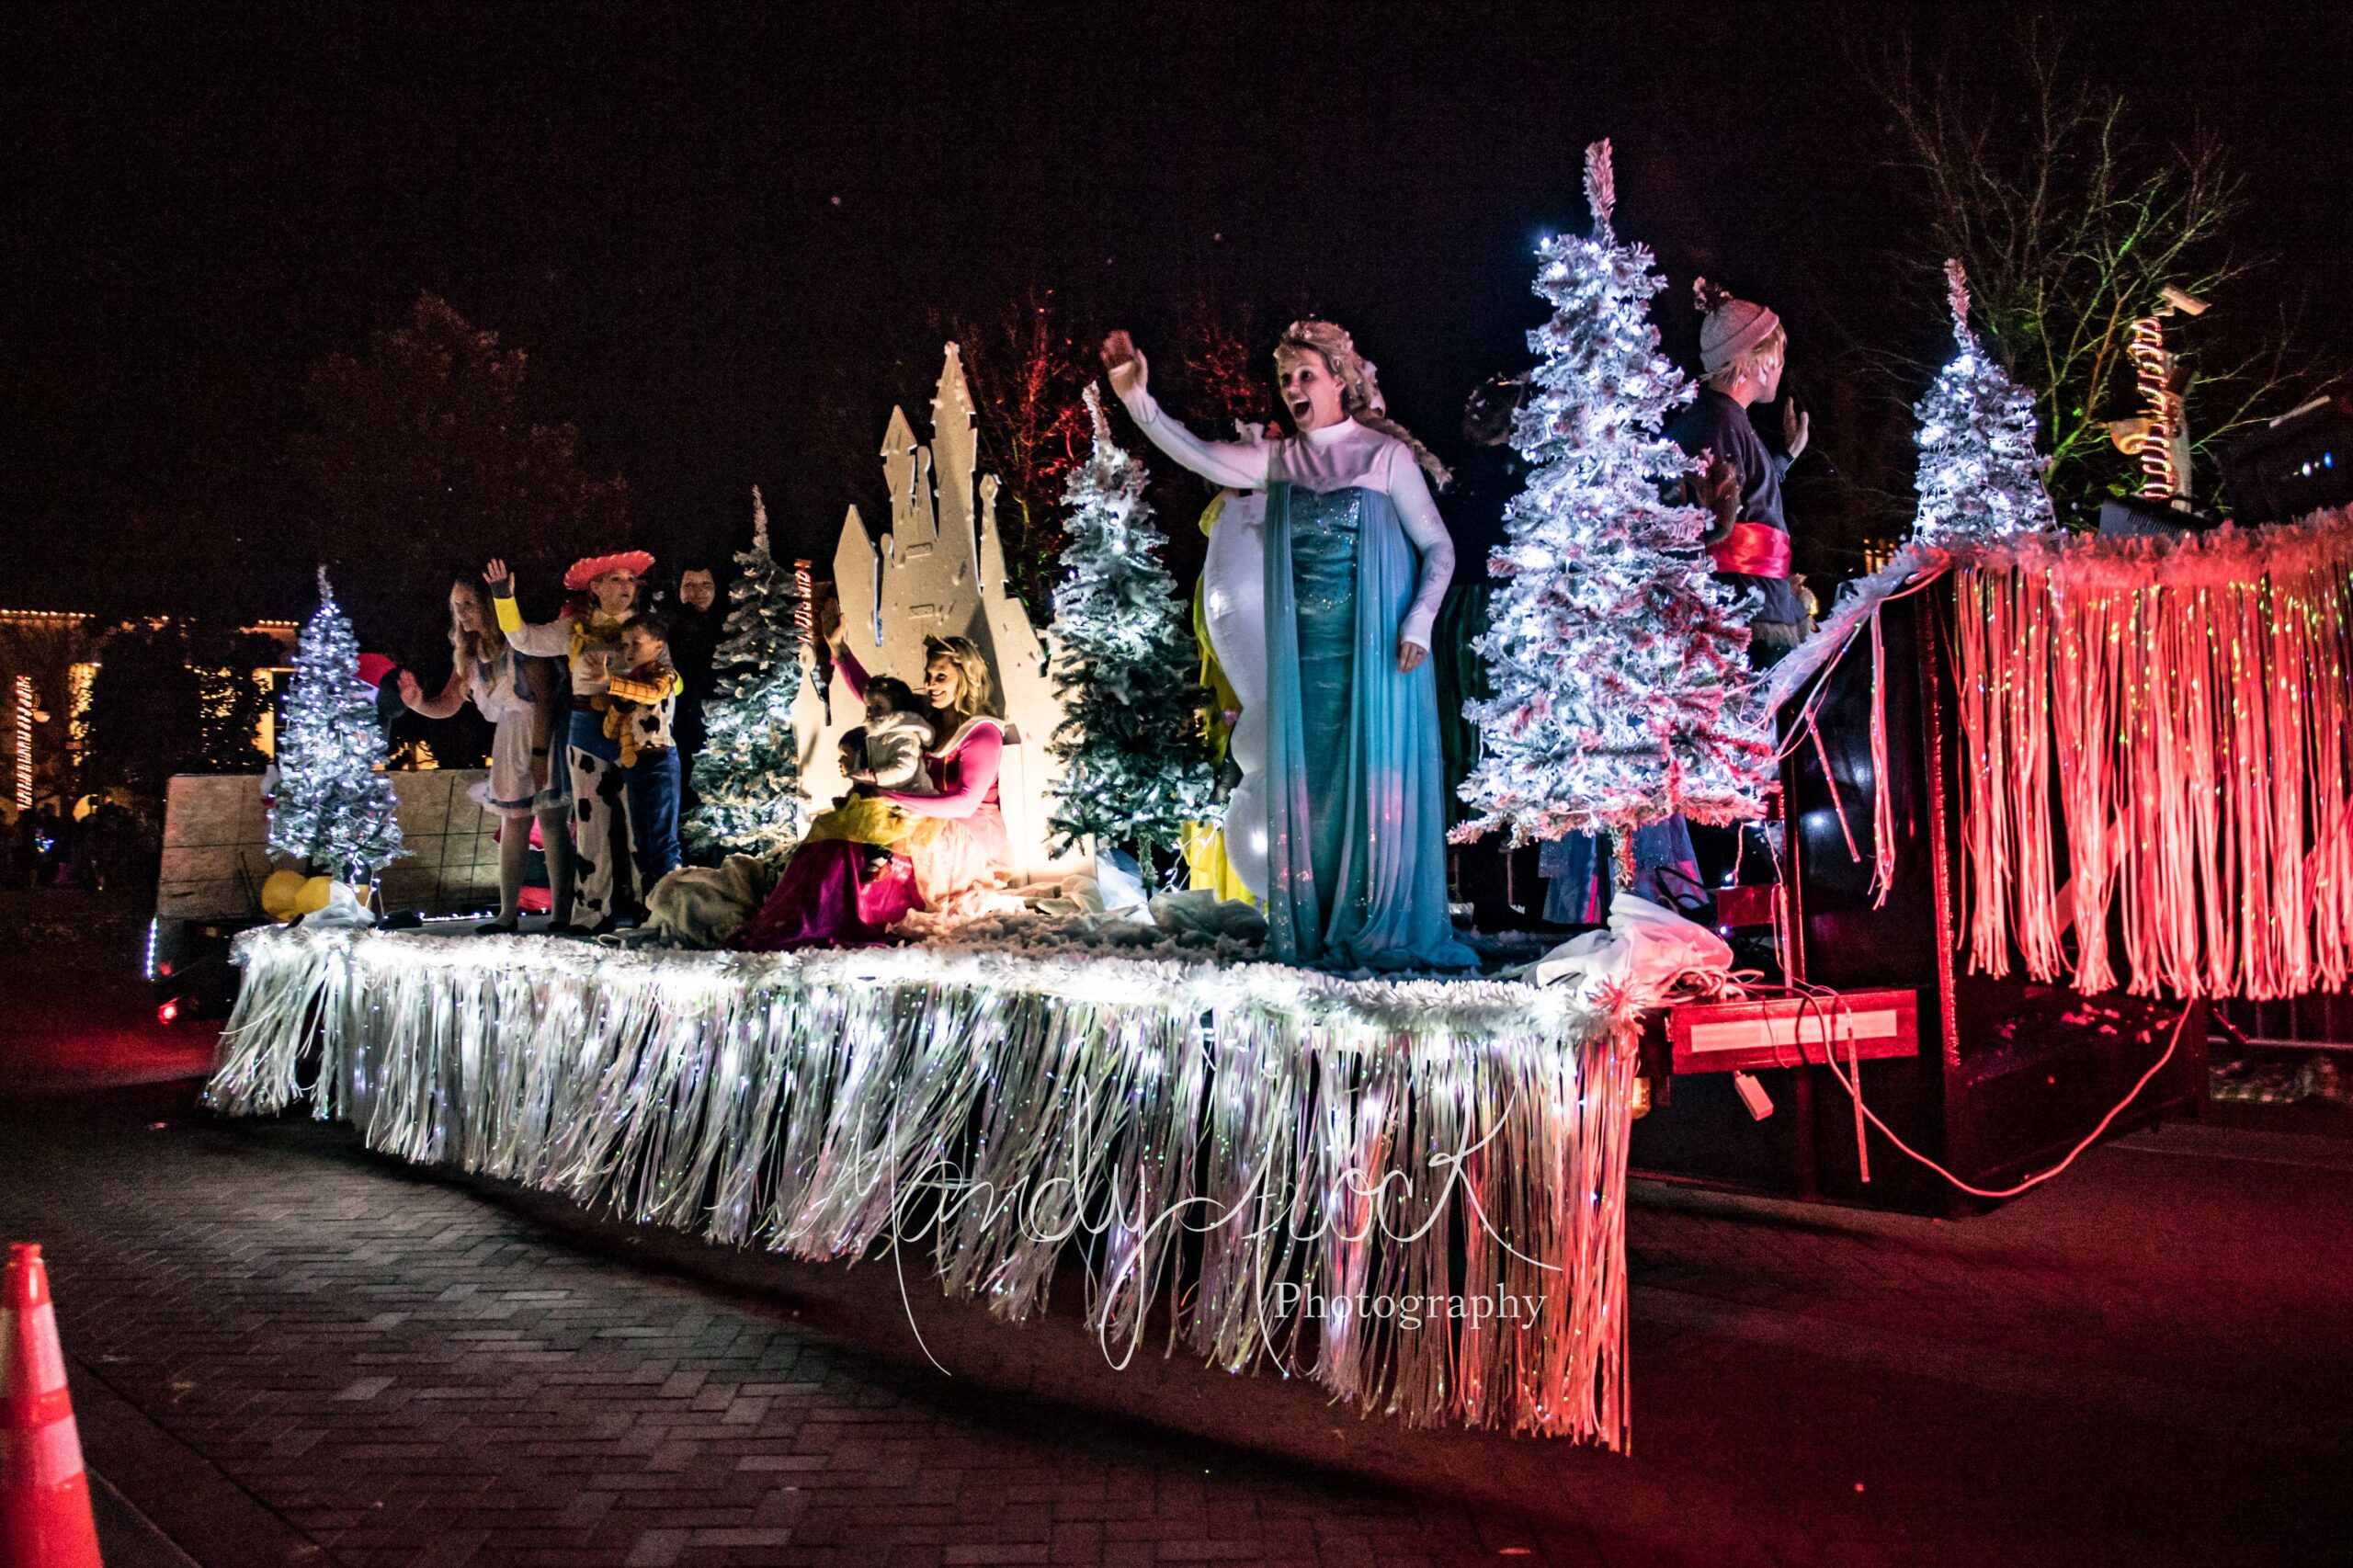 13th Annual Sulphur Springs Lions Club Lighted Christmas Parade Scheduled for Next Friday